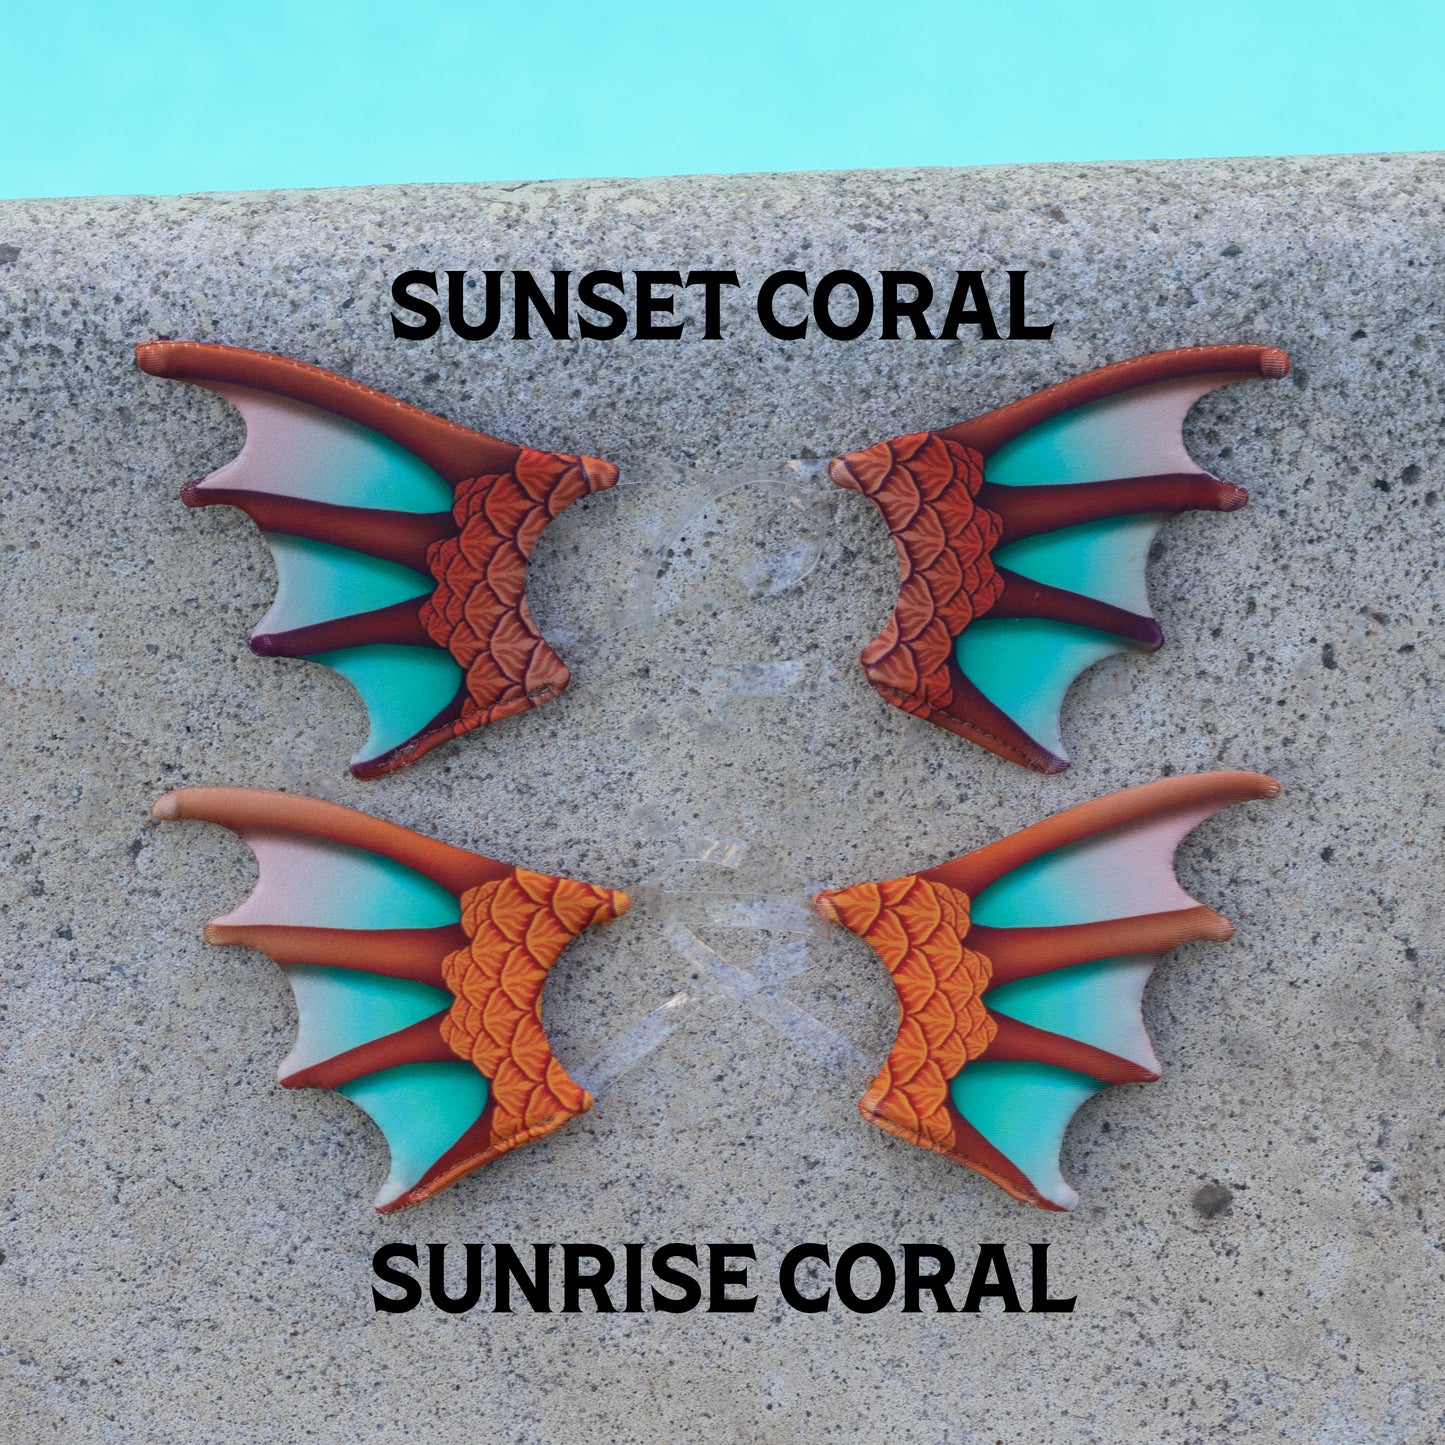 Sunset Coral (rust) Goggle Fins